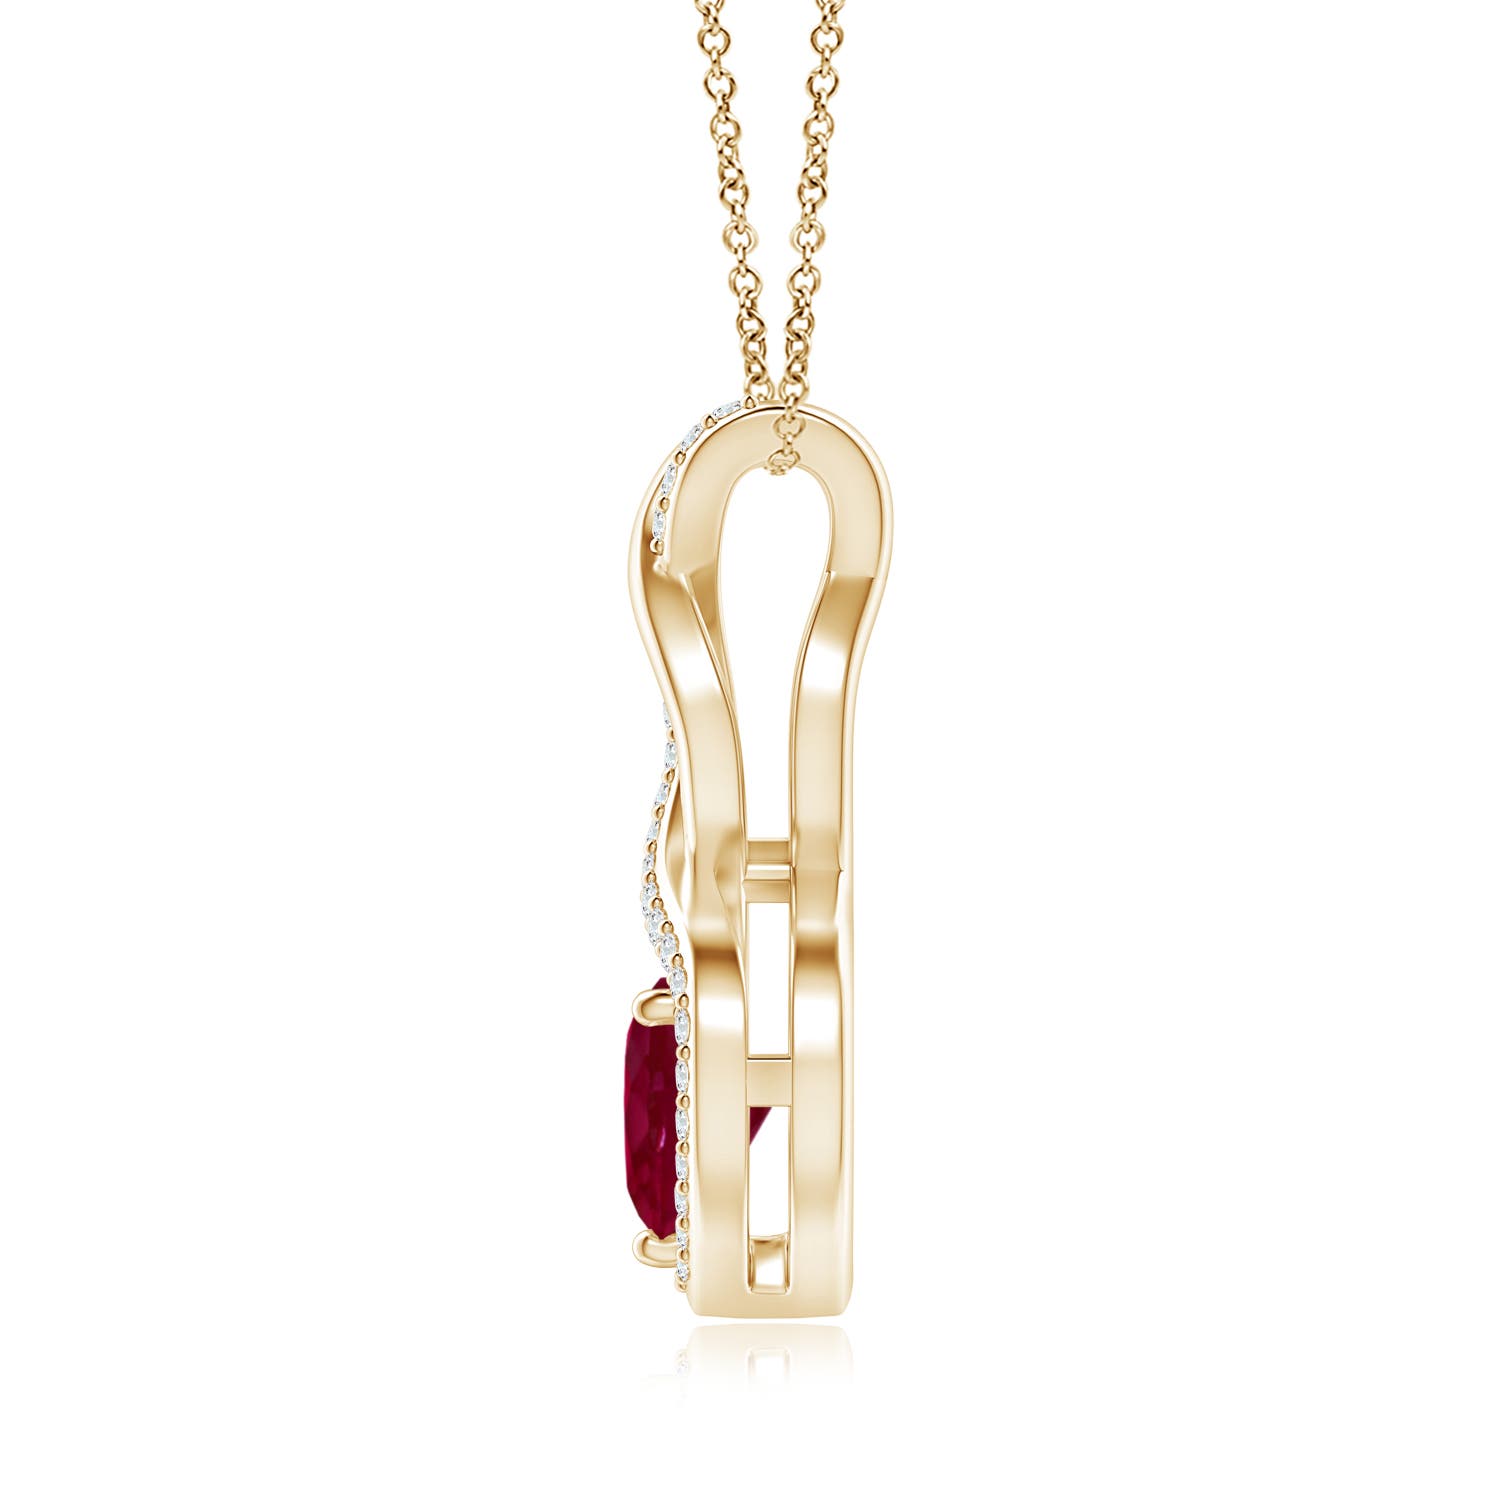 A - Ruby / 0.88 CT / 14 KT Yellow Gold